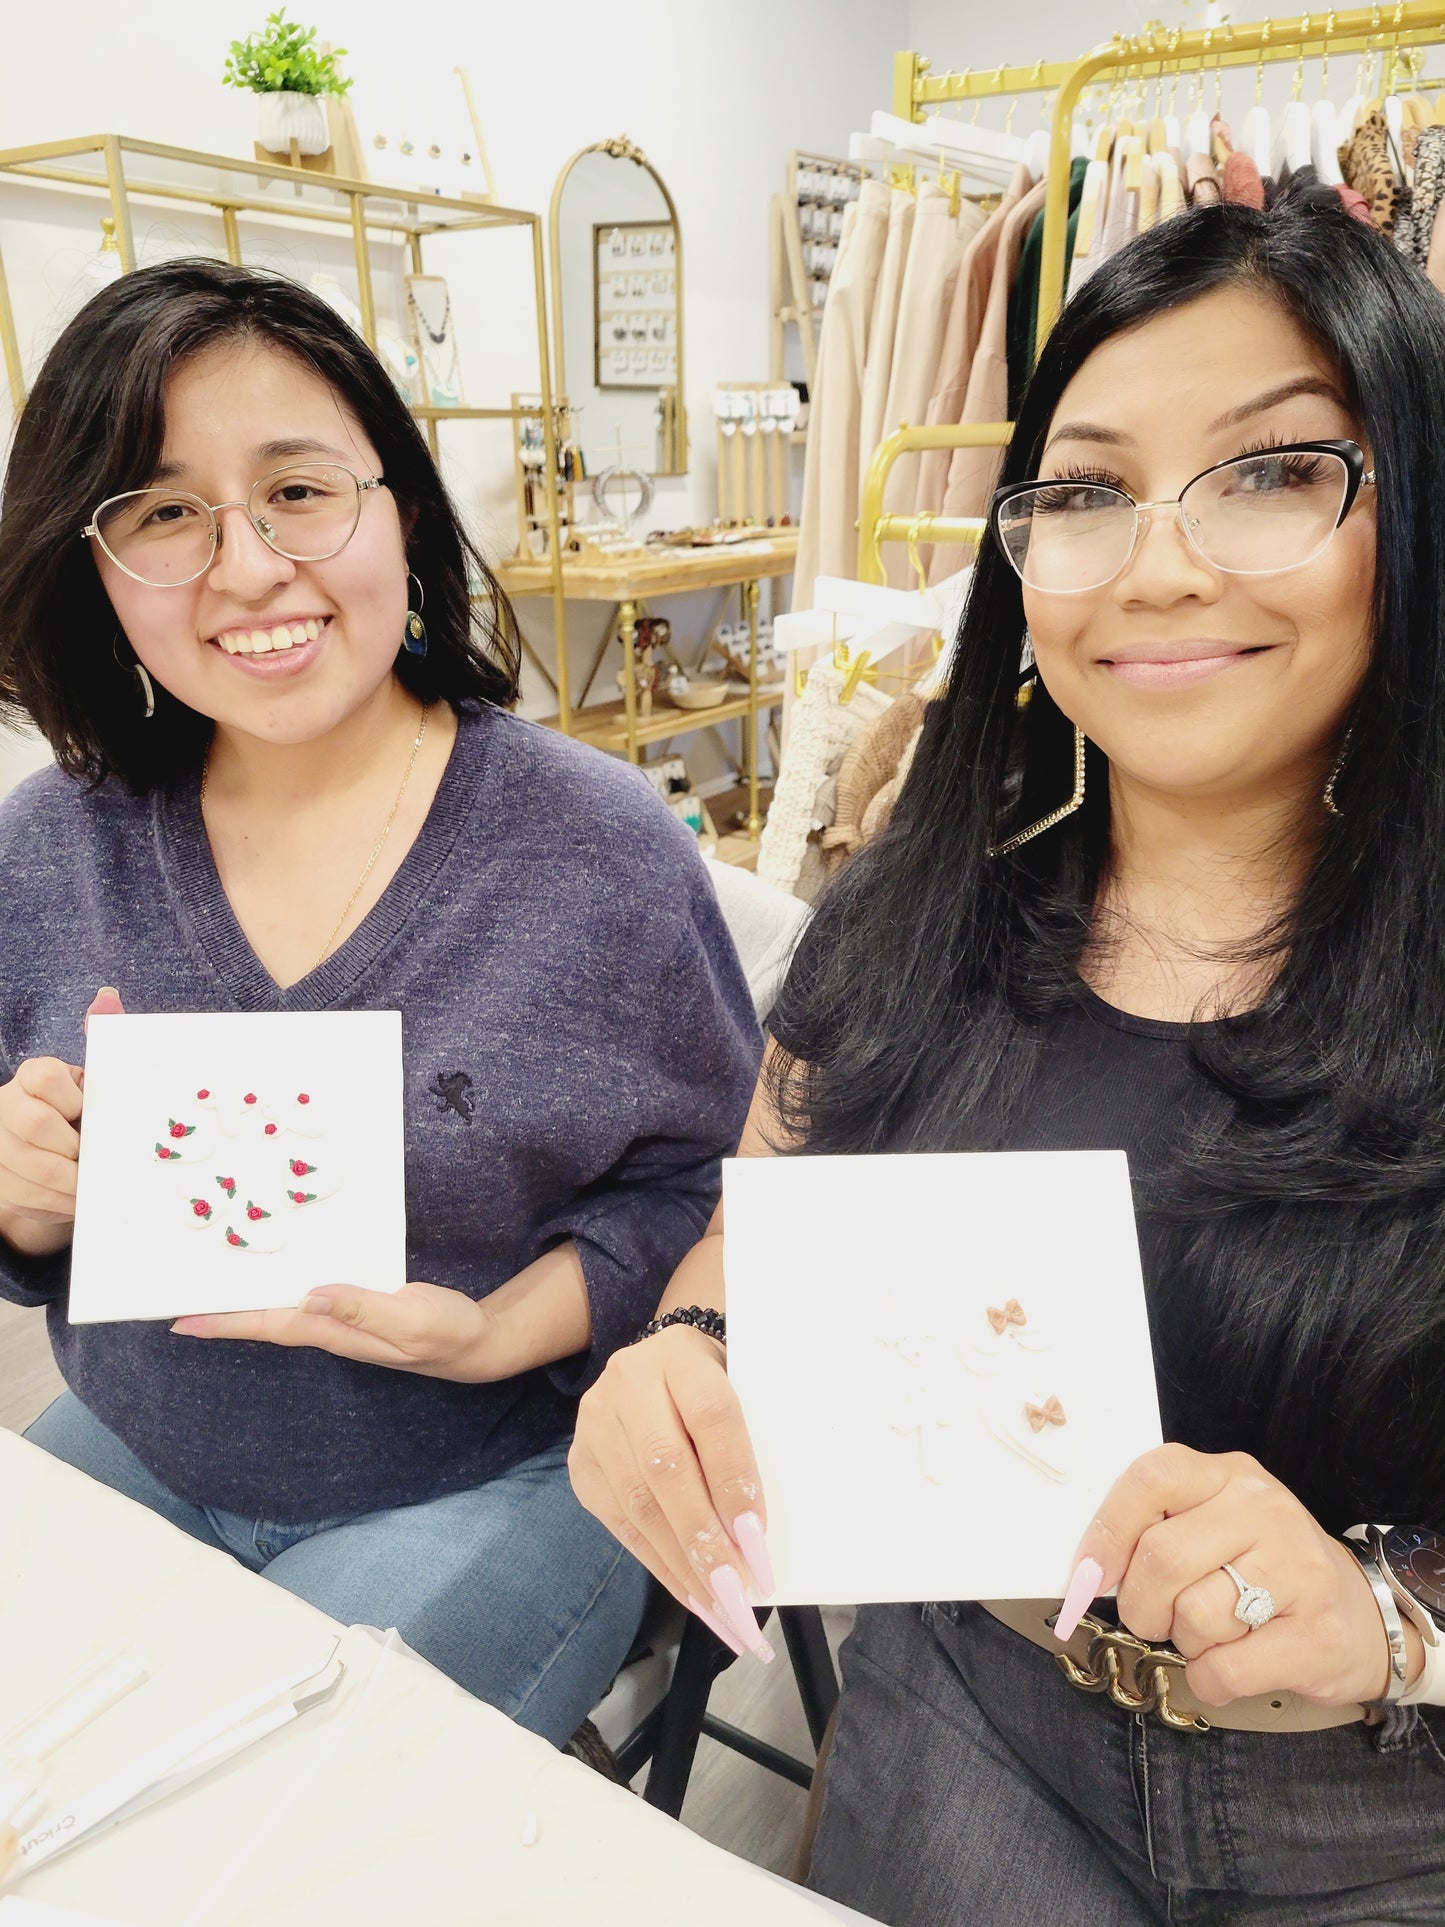 Team Bonding Workshops: Craft Connections Through Jewelry Making